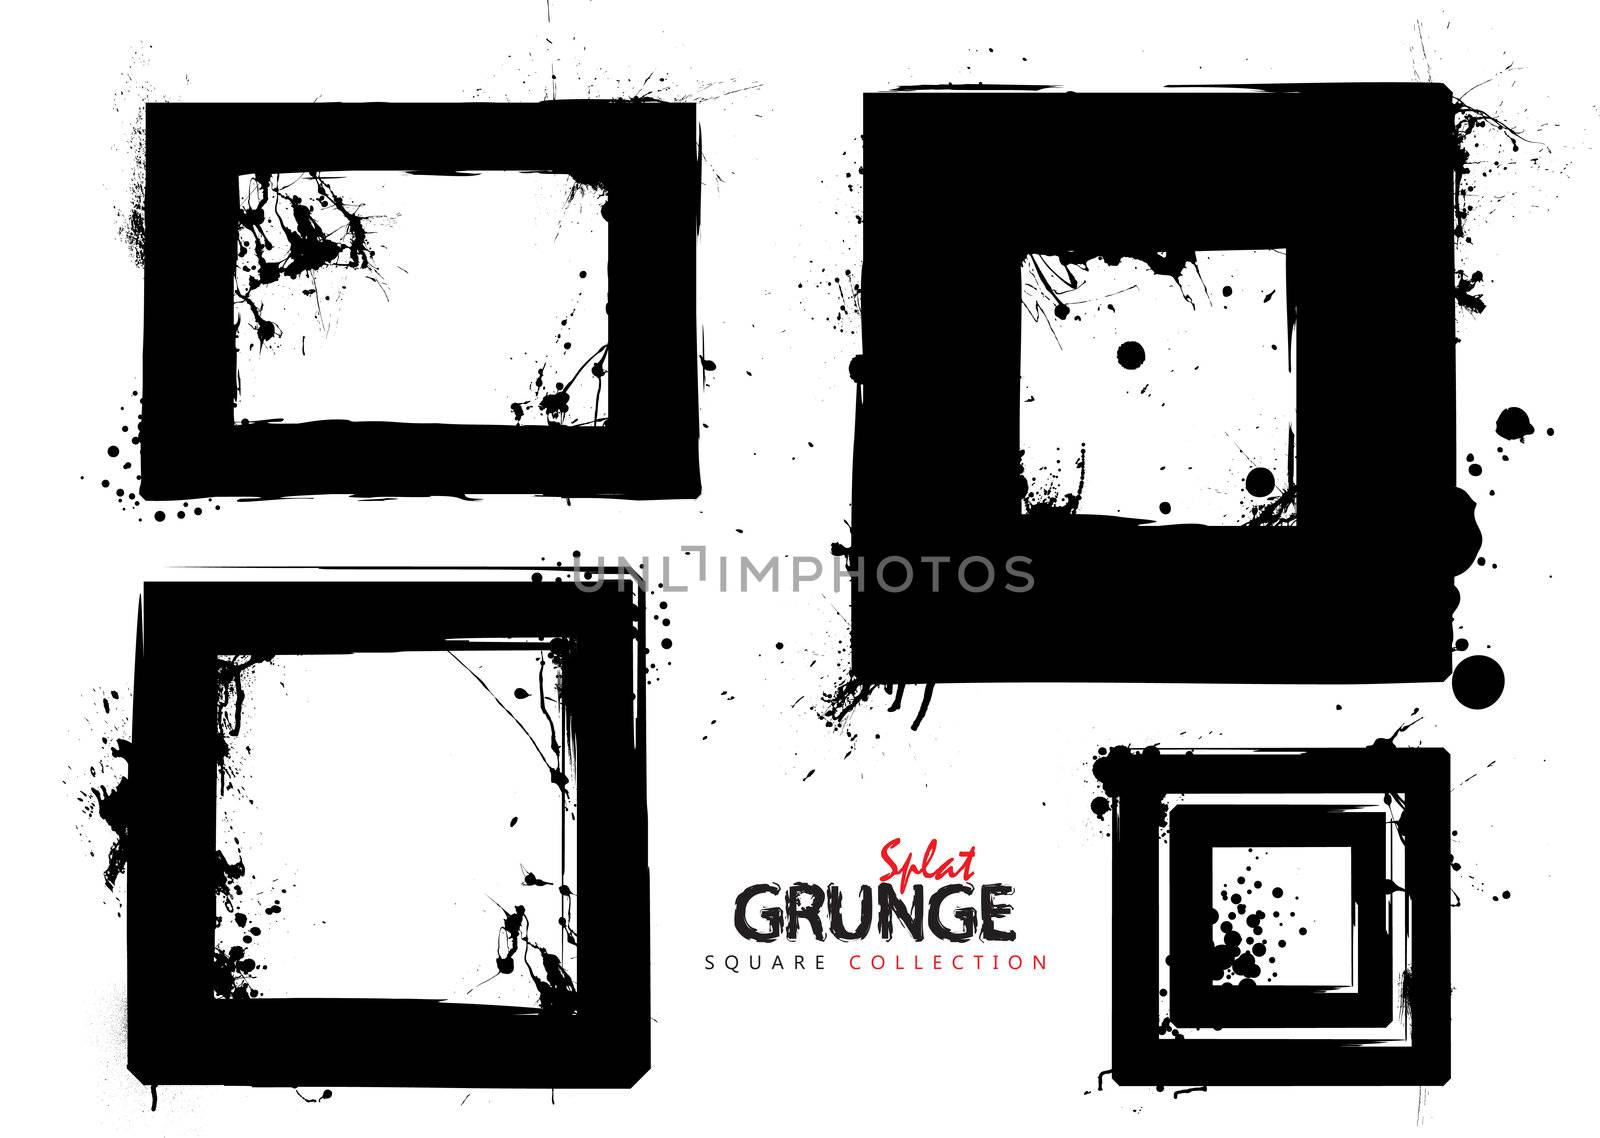 Grunge square collection by nicemonkey